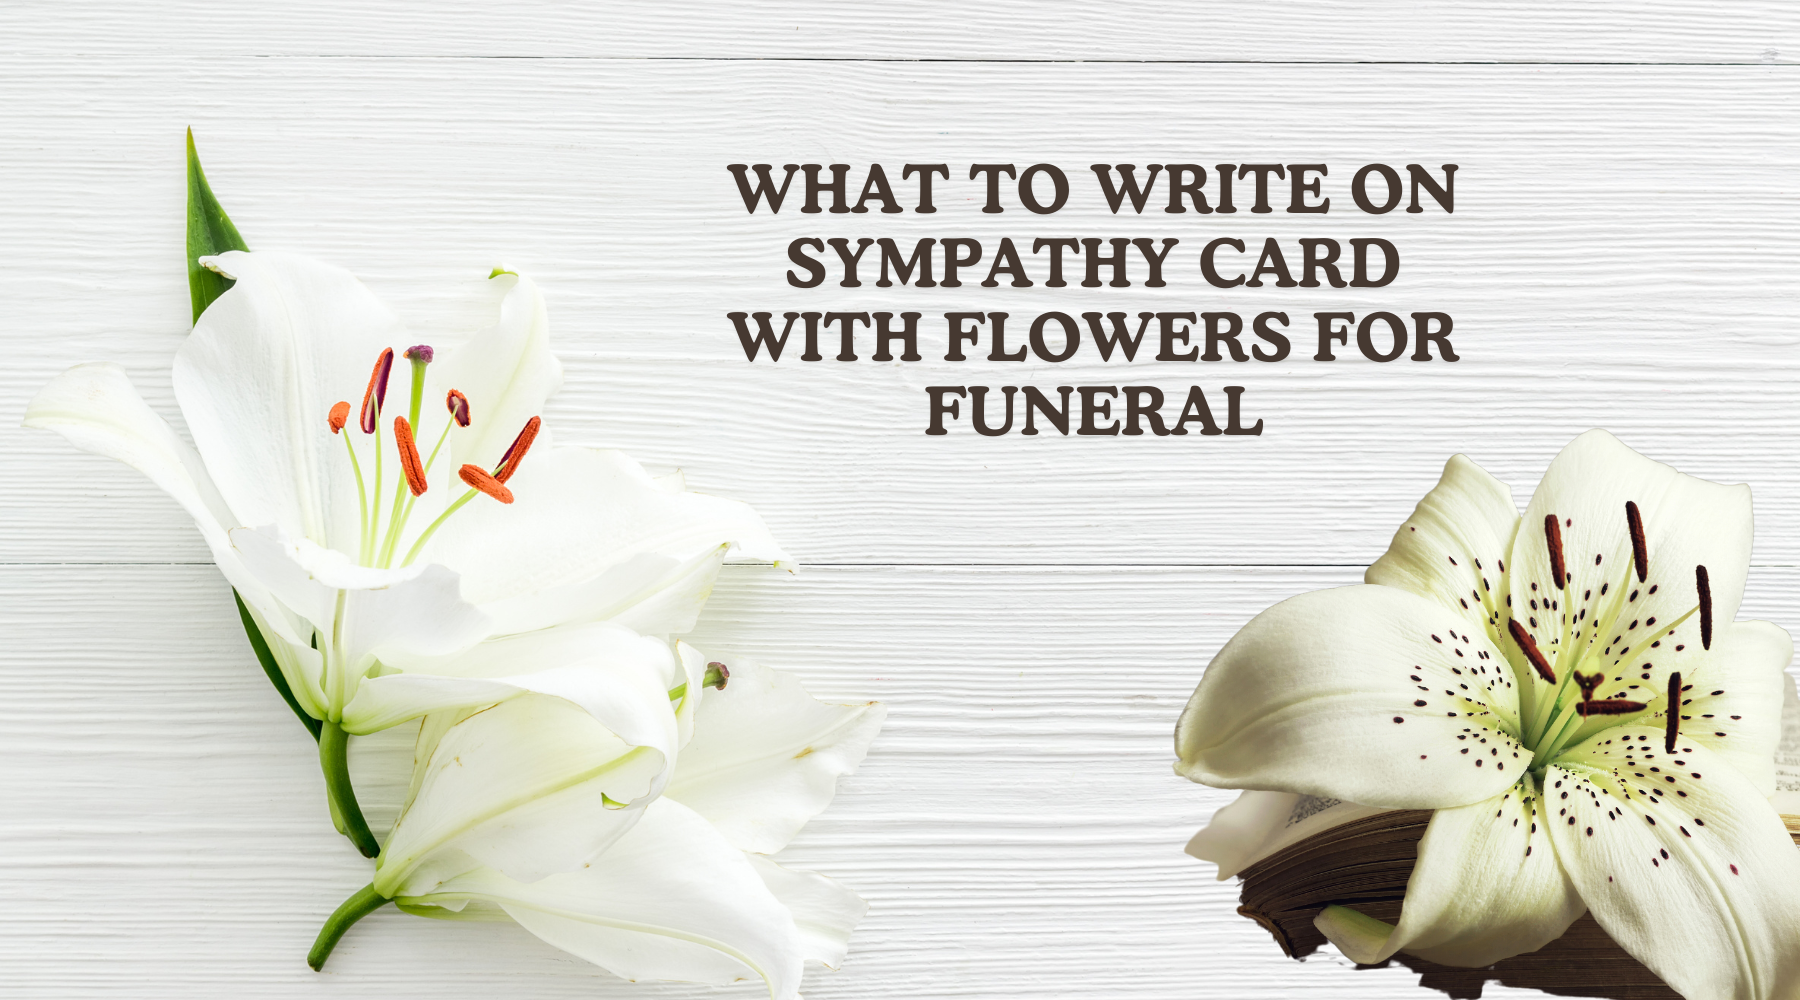 What To Write On Sympathy Card With Flowers For Funeral